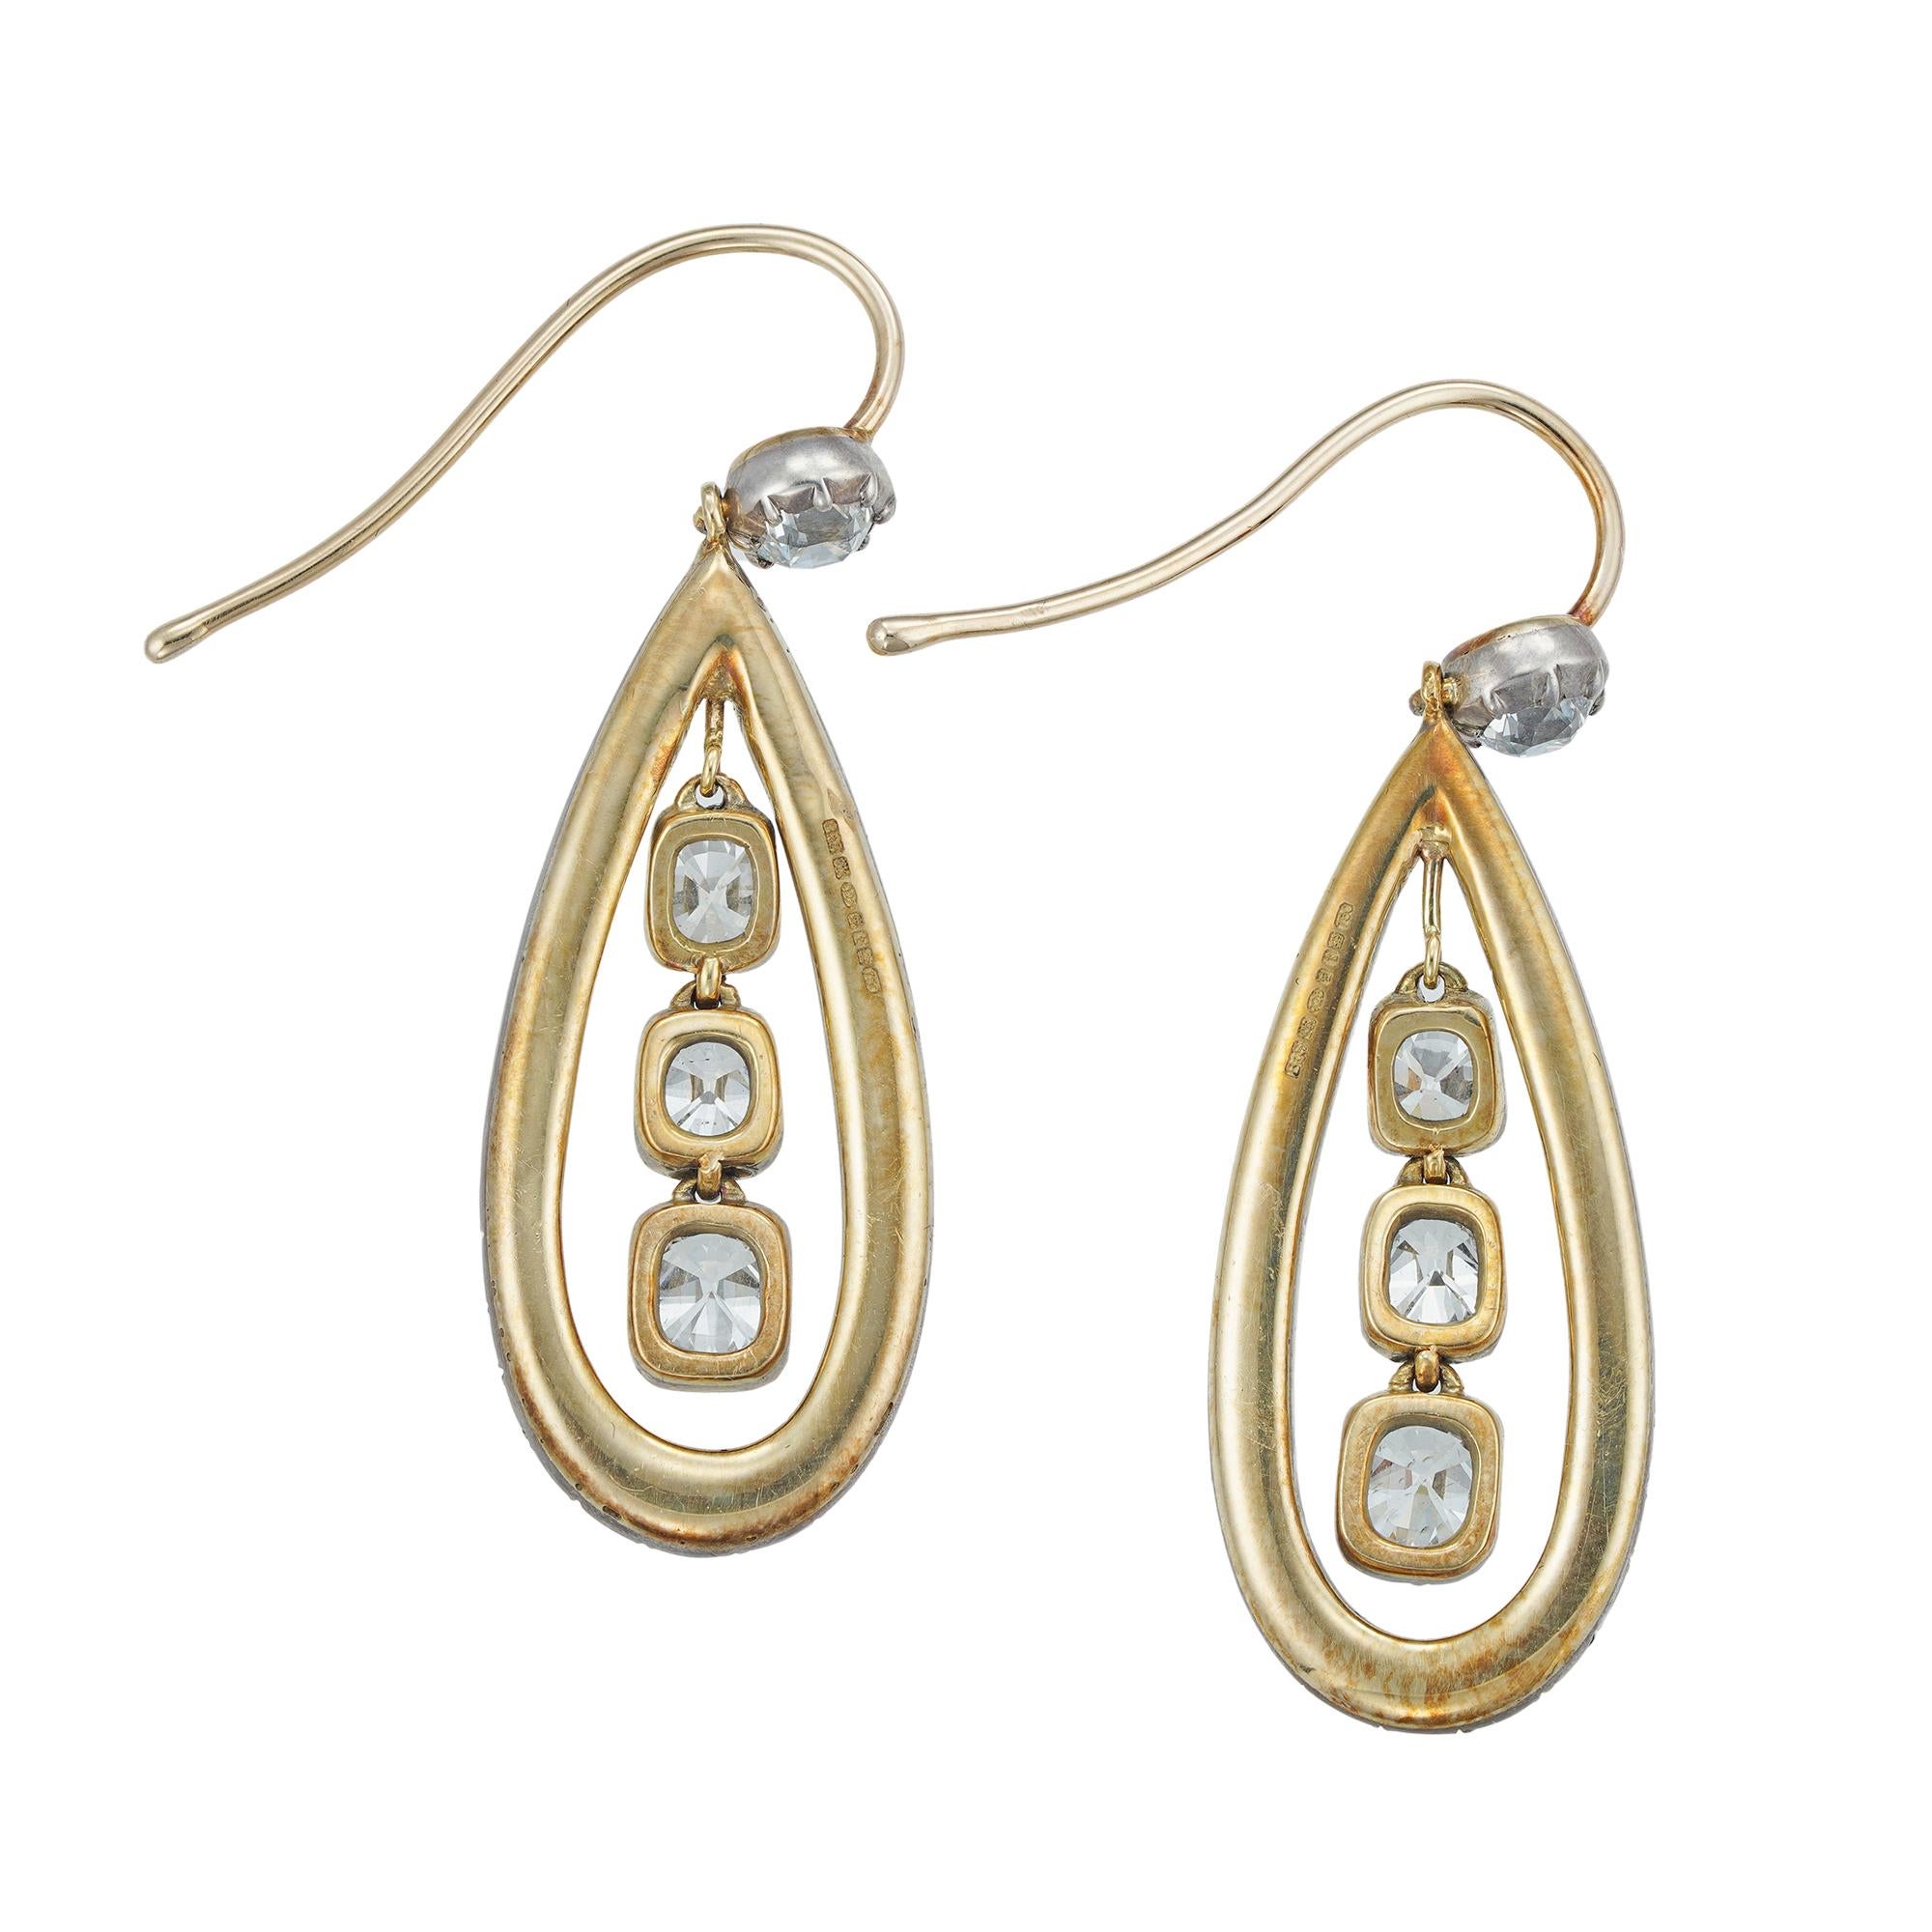 A pair of diamond drop earrings, each earring with three old-cut diamonds suspended within a pear-shape diamond frame all beneath an old-cut diamond surmount, the top and three suspended old-cuts weighing a total of 3.3cts and the surrounding